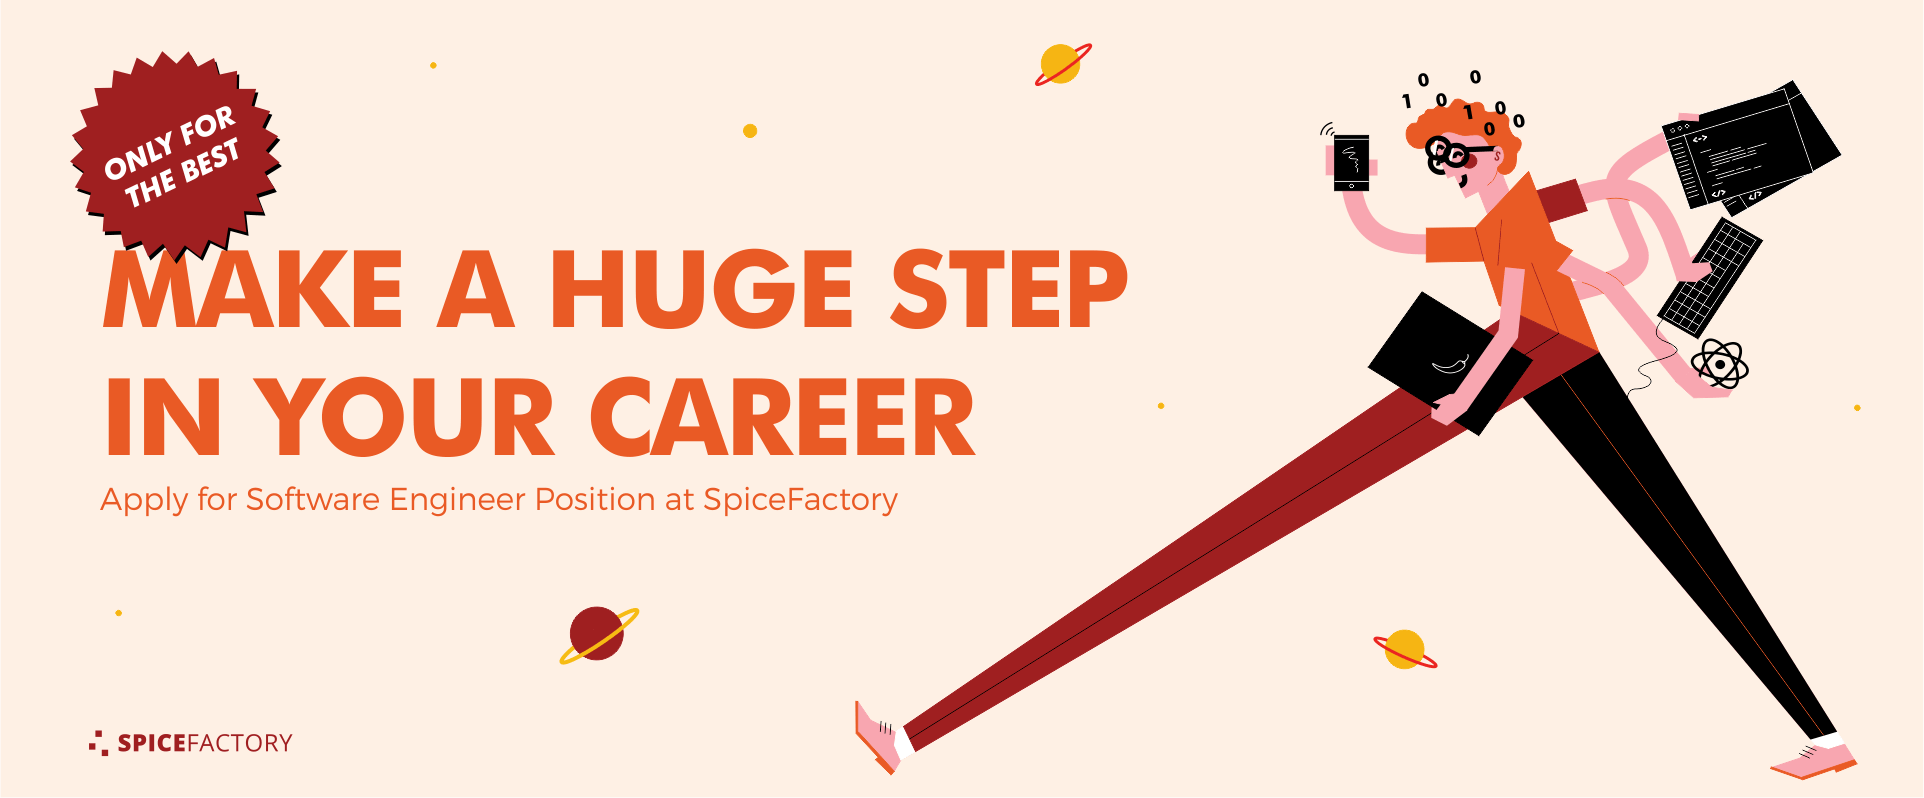 Make a Huge Step in Your Career